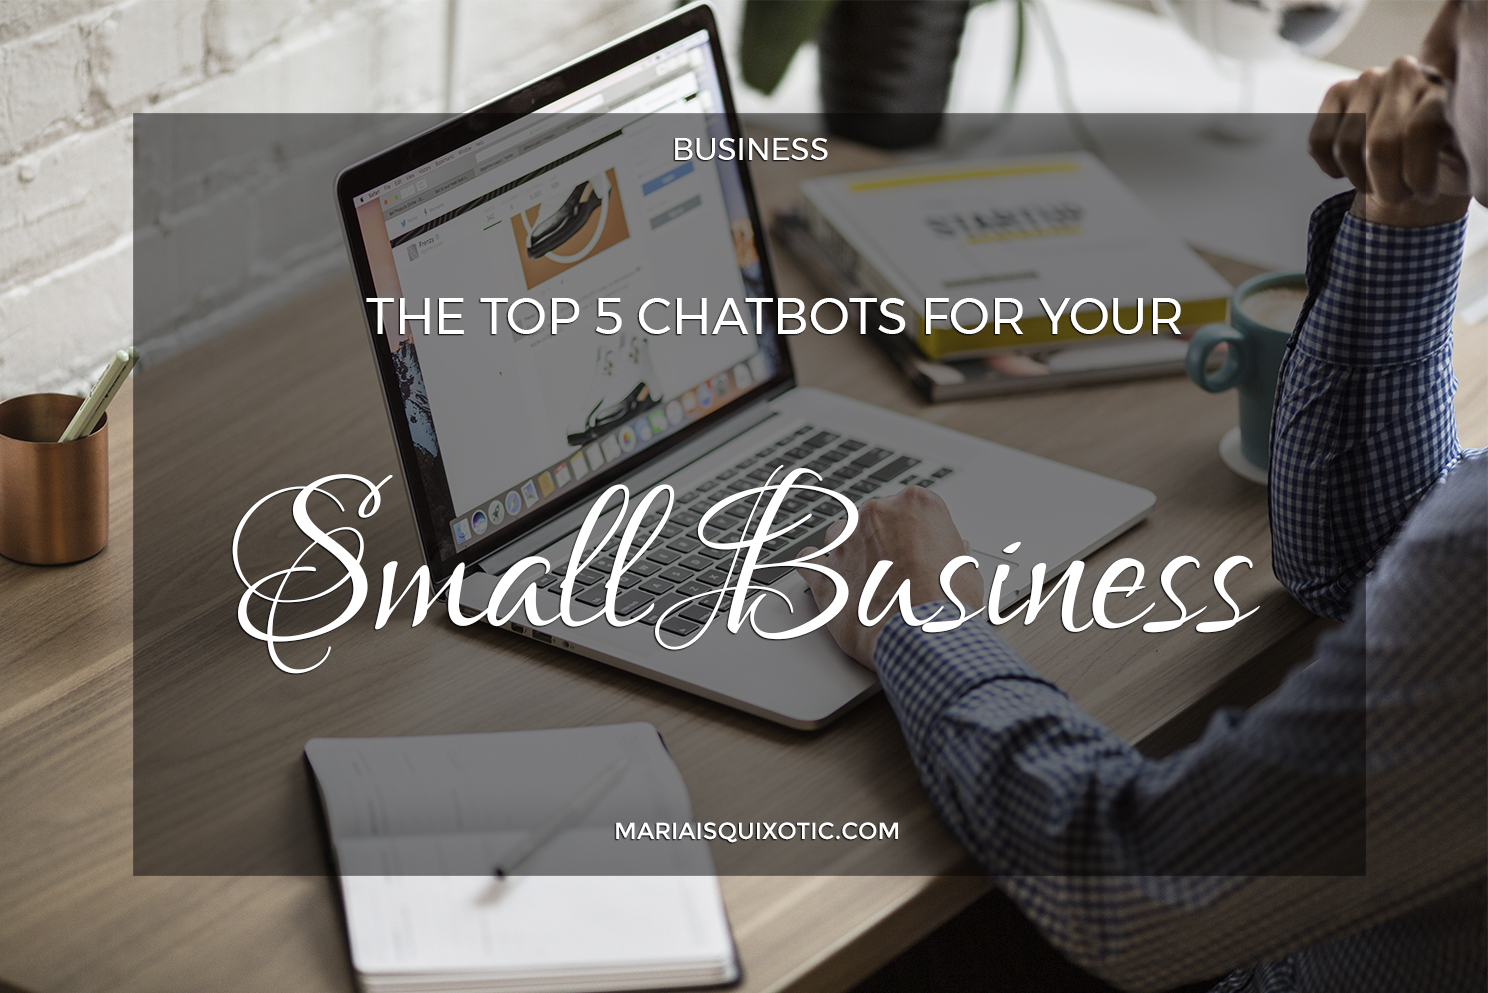 The Top 5 Chatbots for Your Small Business